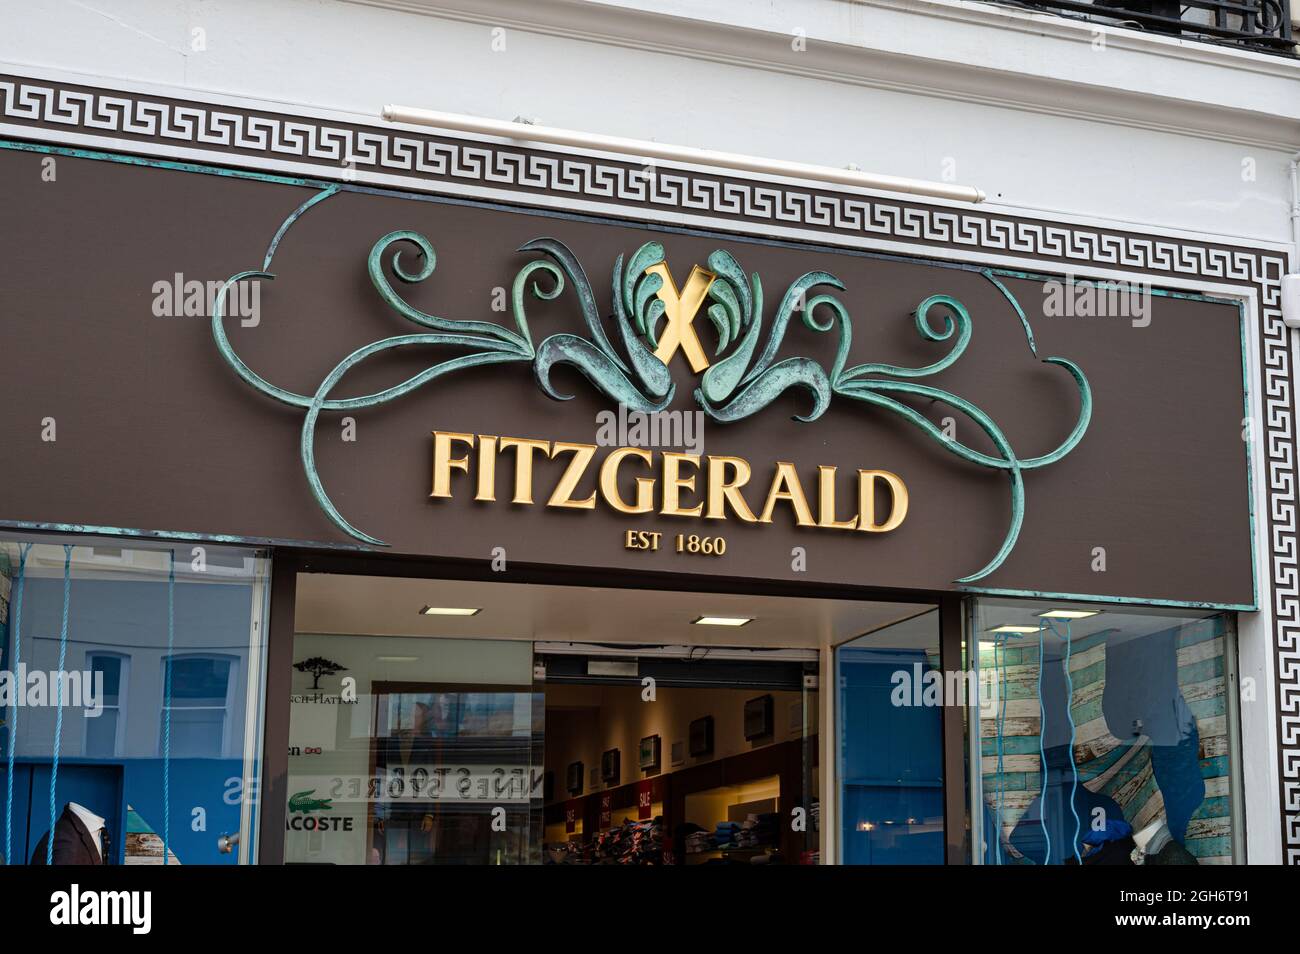 Cork, Ireland- July 14, 2021: The sign for Fitzgerald menswear store in Cork city Stock Photo